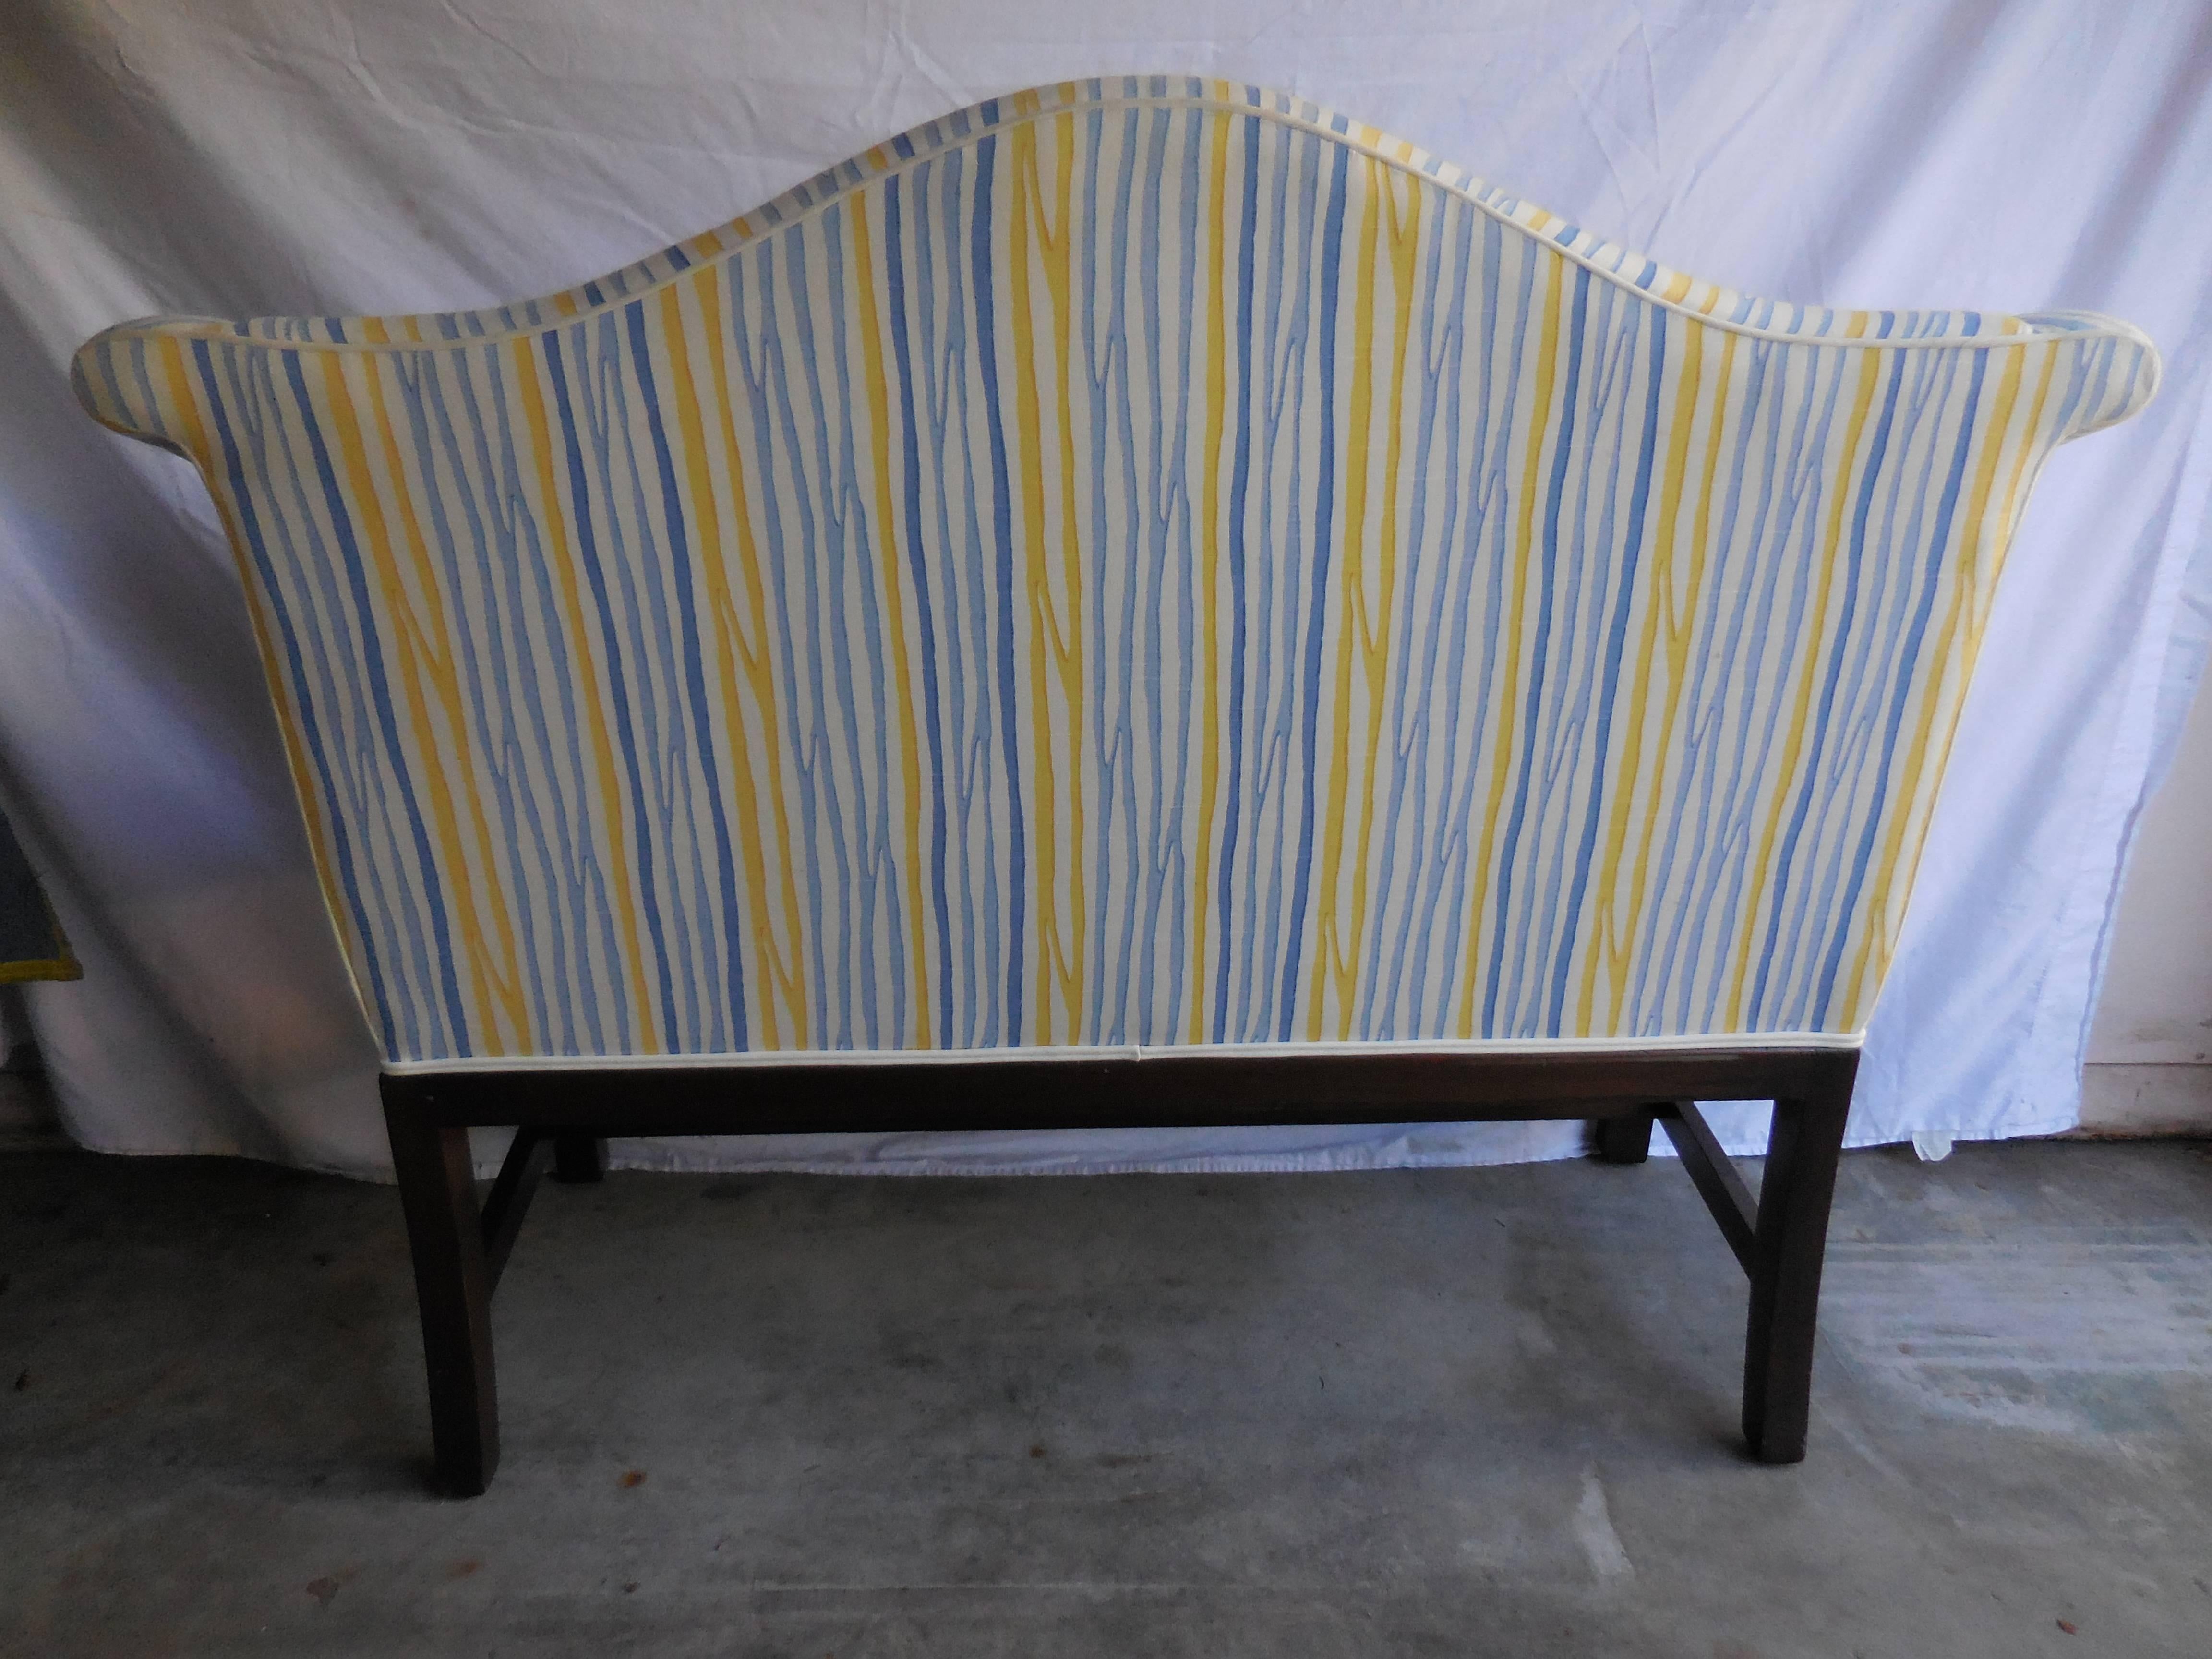 Contemporary Camelback Settee In Excellent Condition For Sale In West Palm Beach, FL